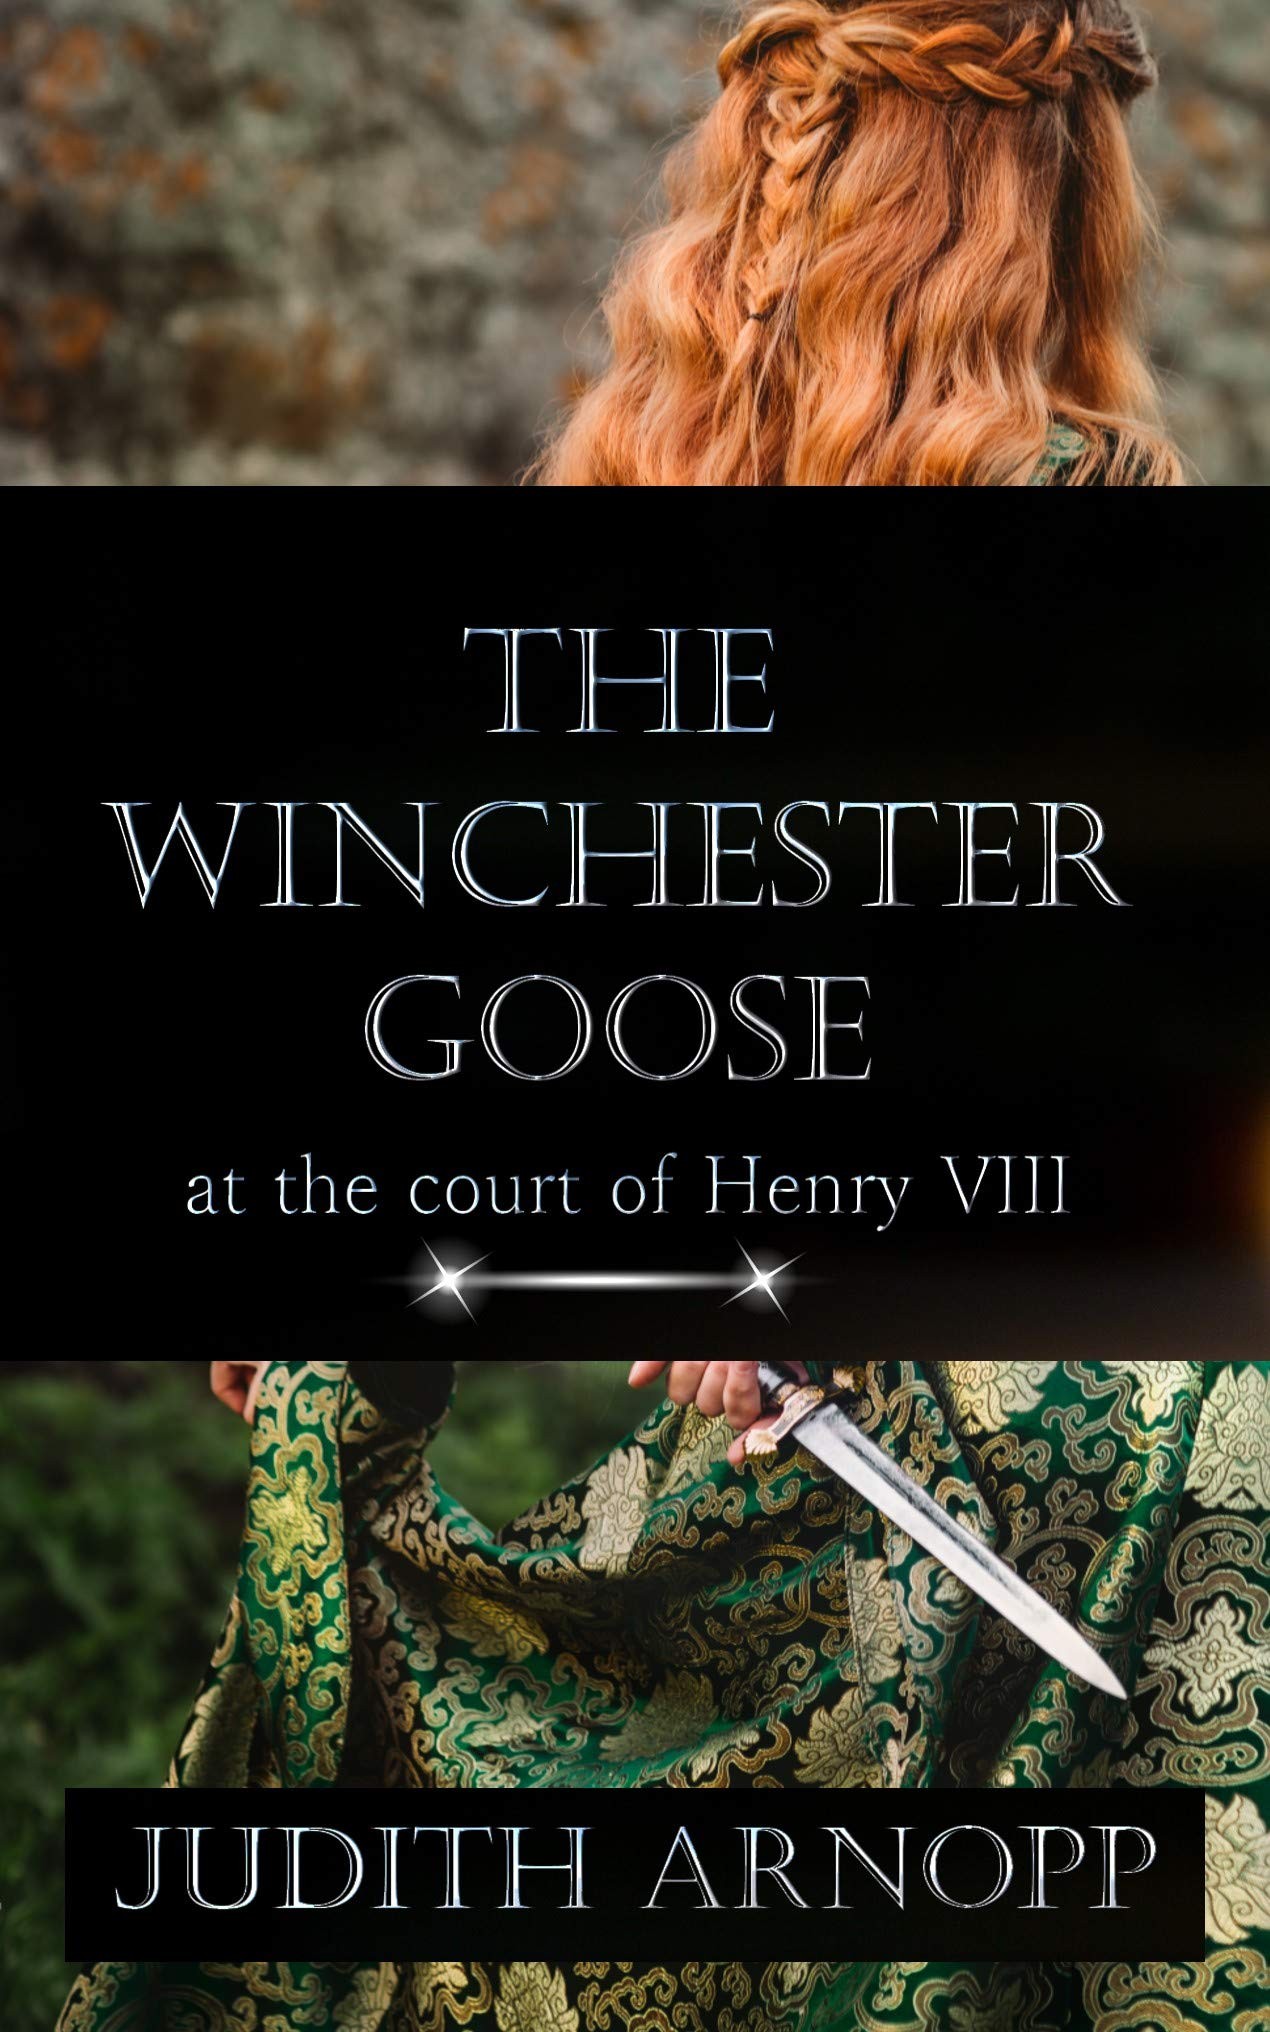 The Winchester Goose: At the Court of Henry VIII